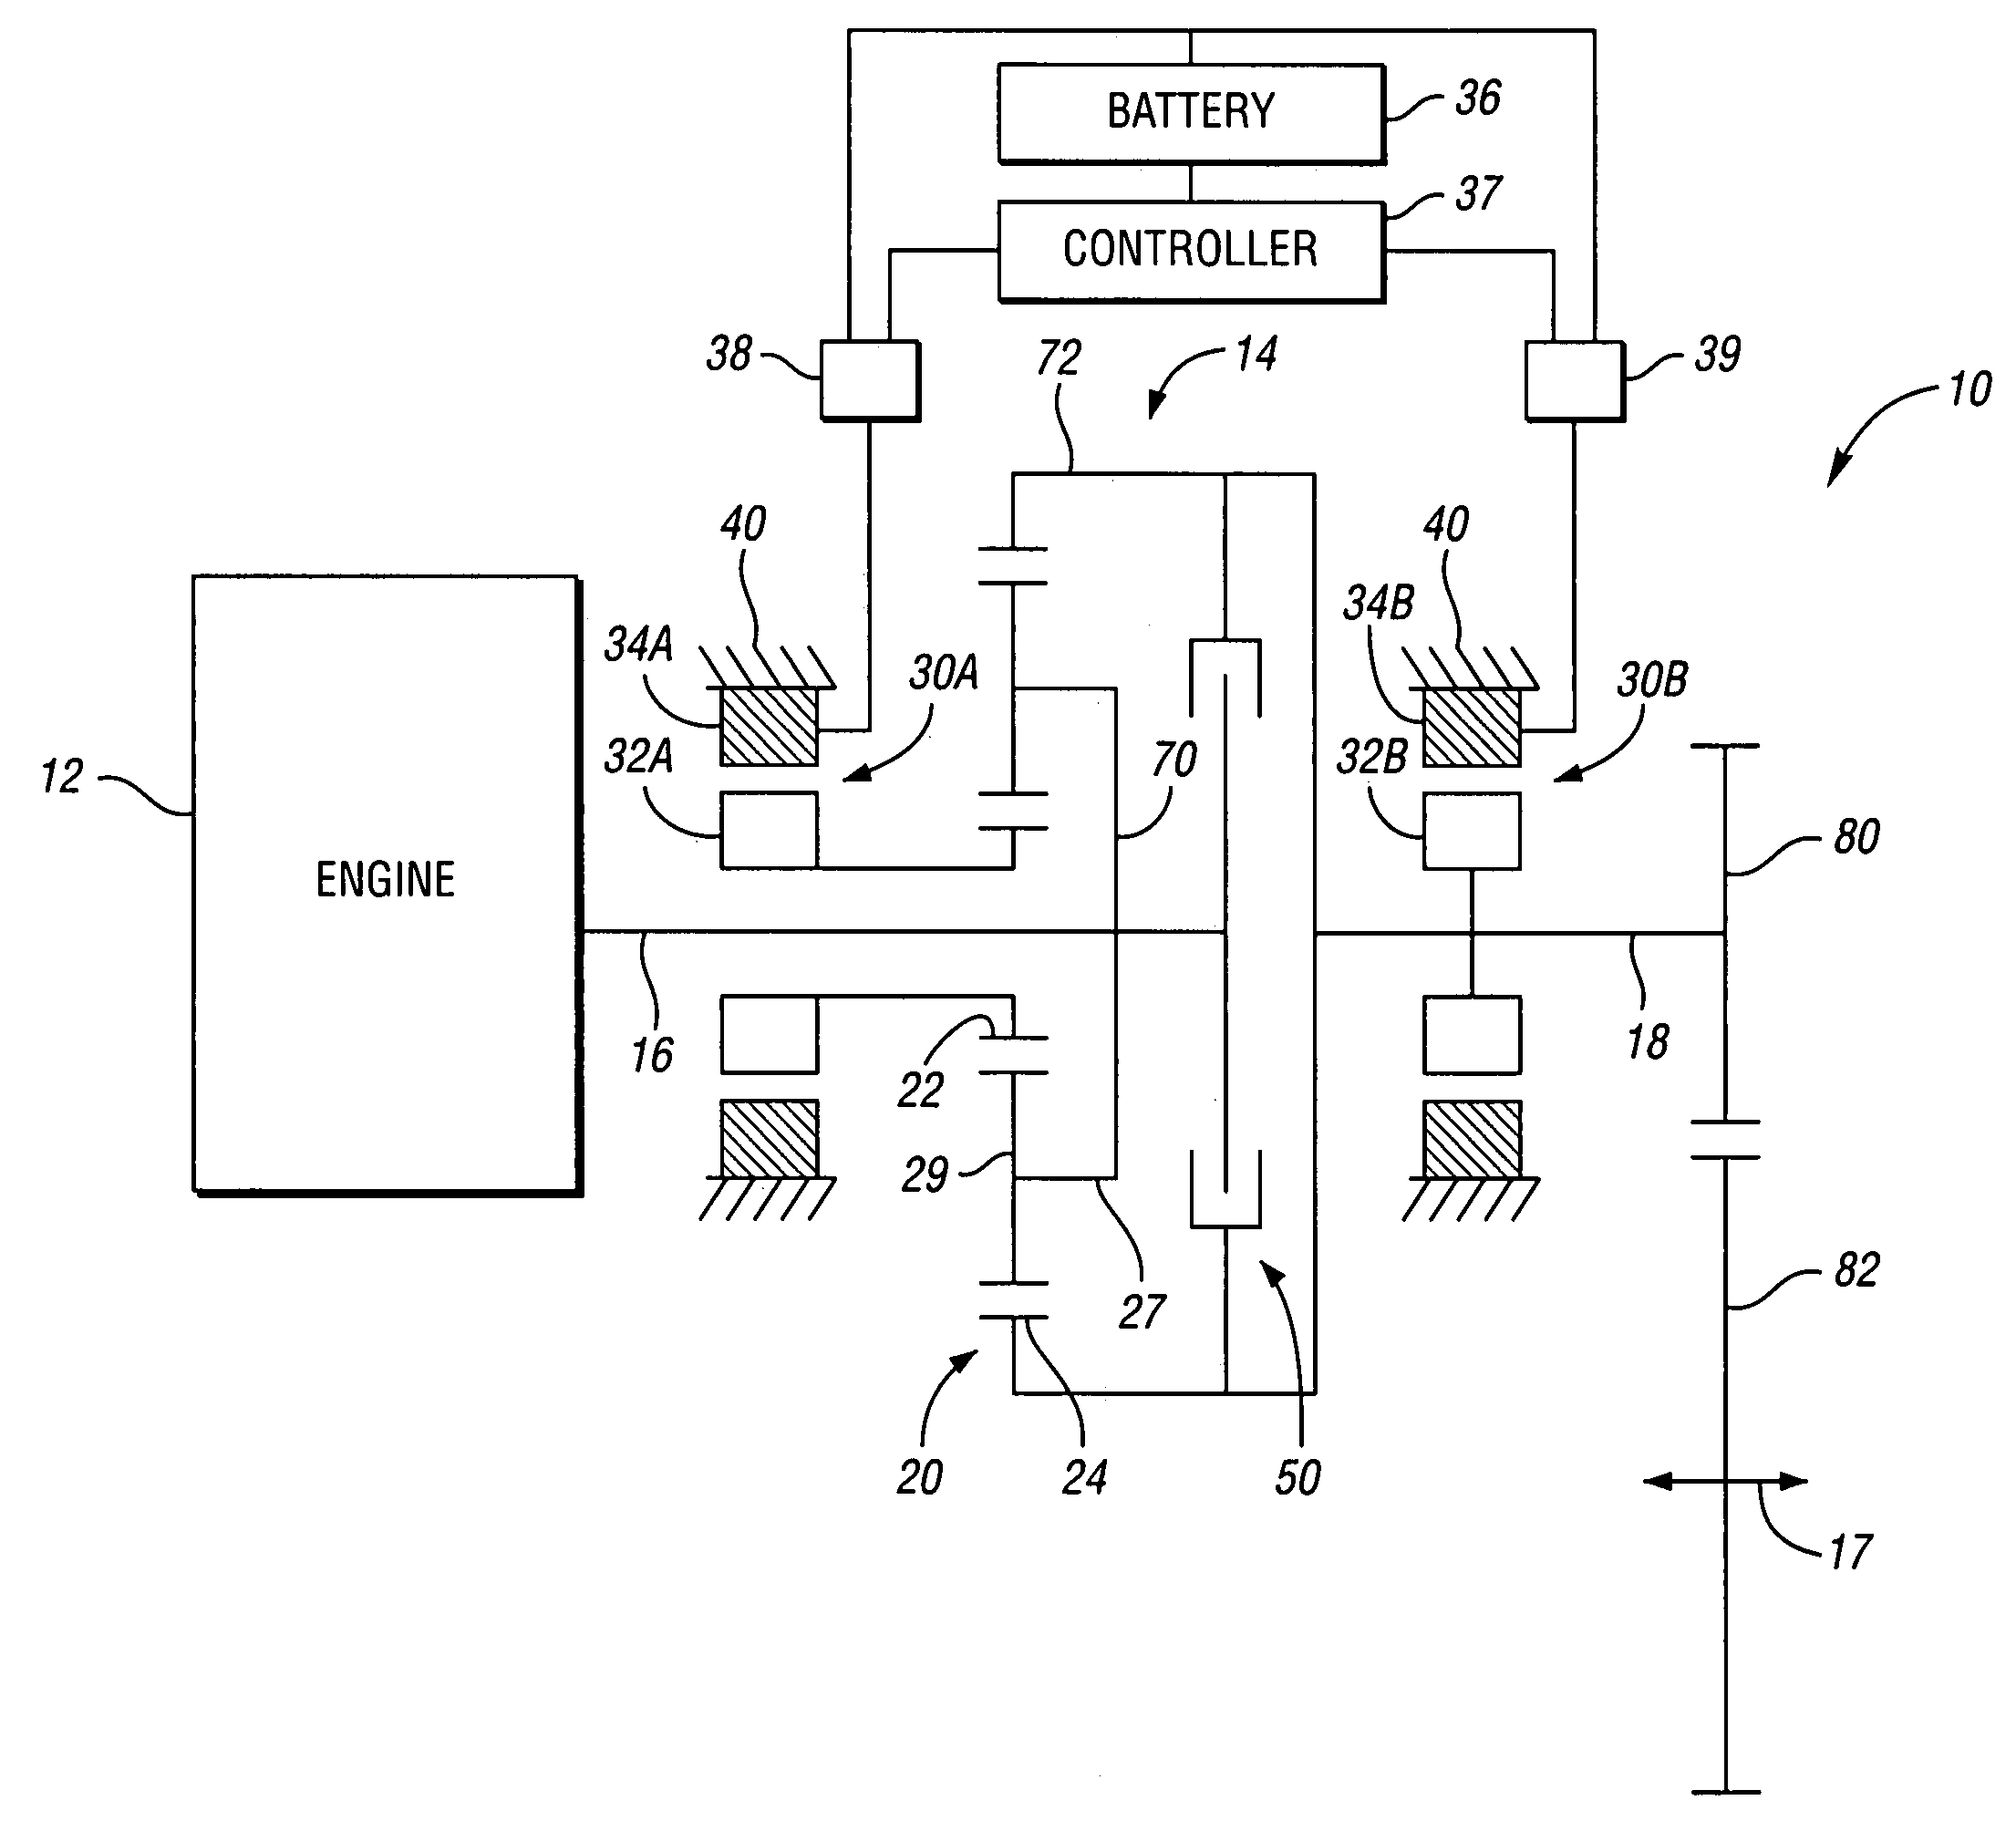 Single range electrically variable transmission with lockup clutch and method of operation